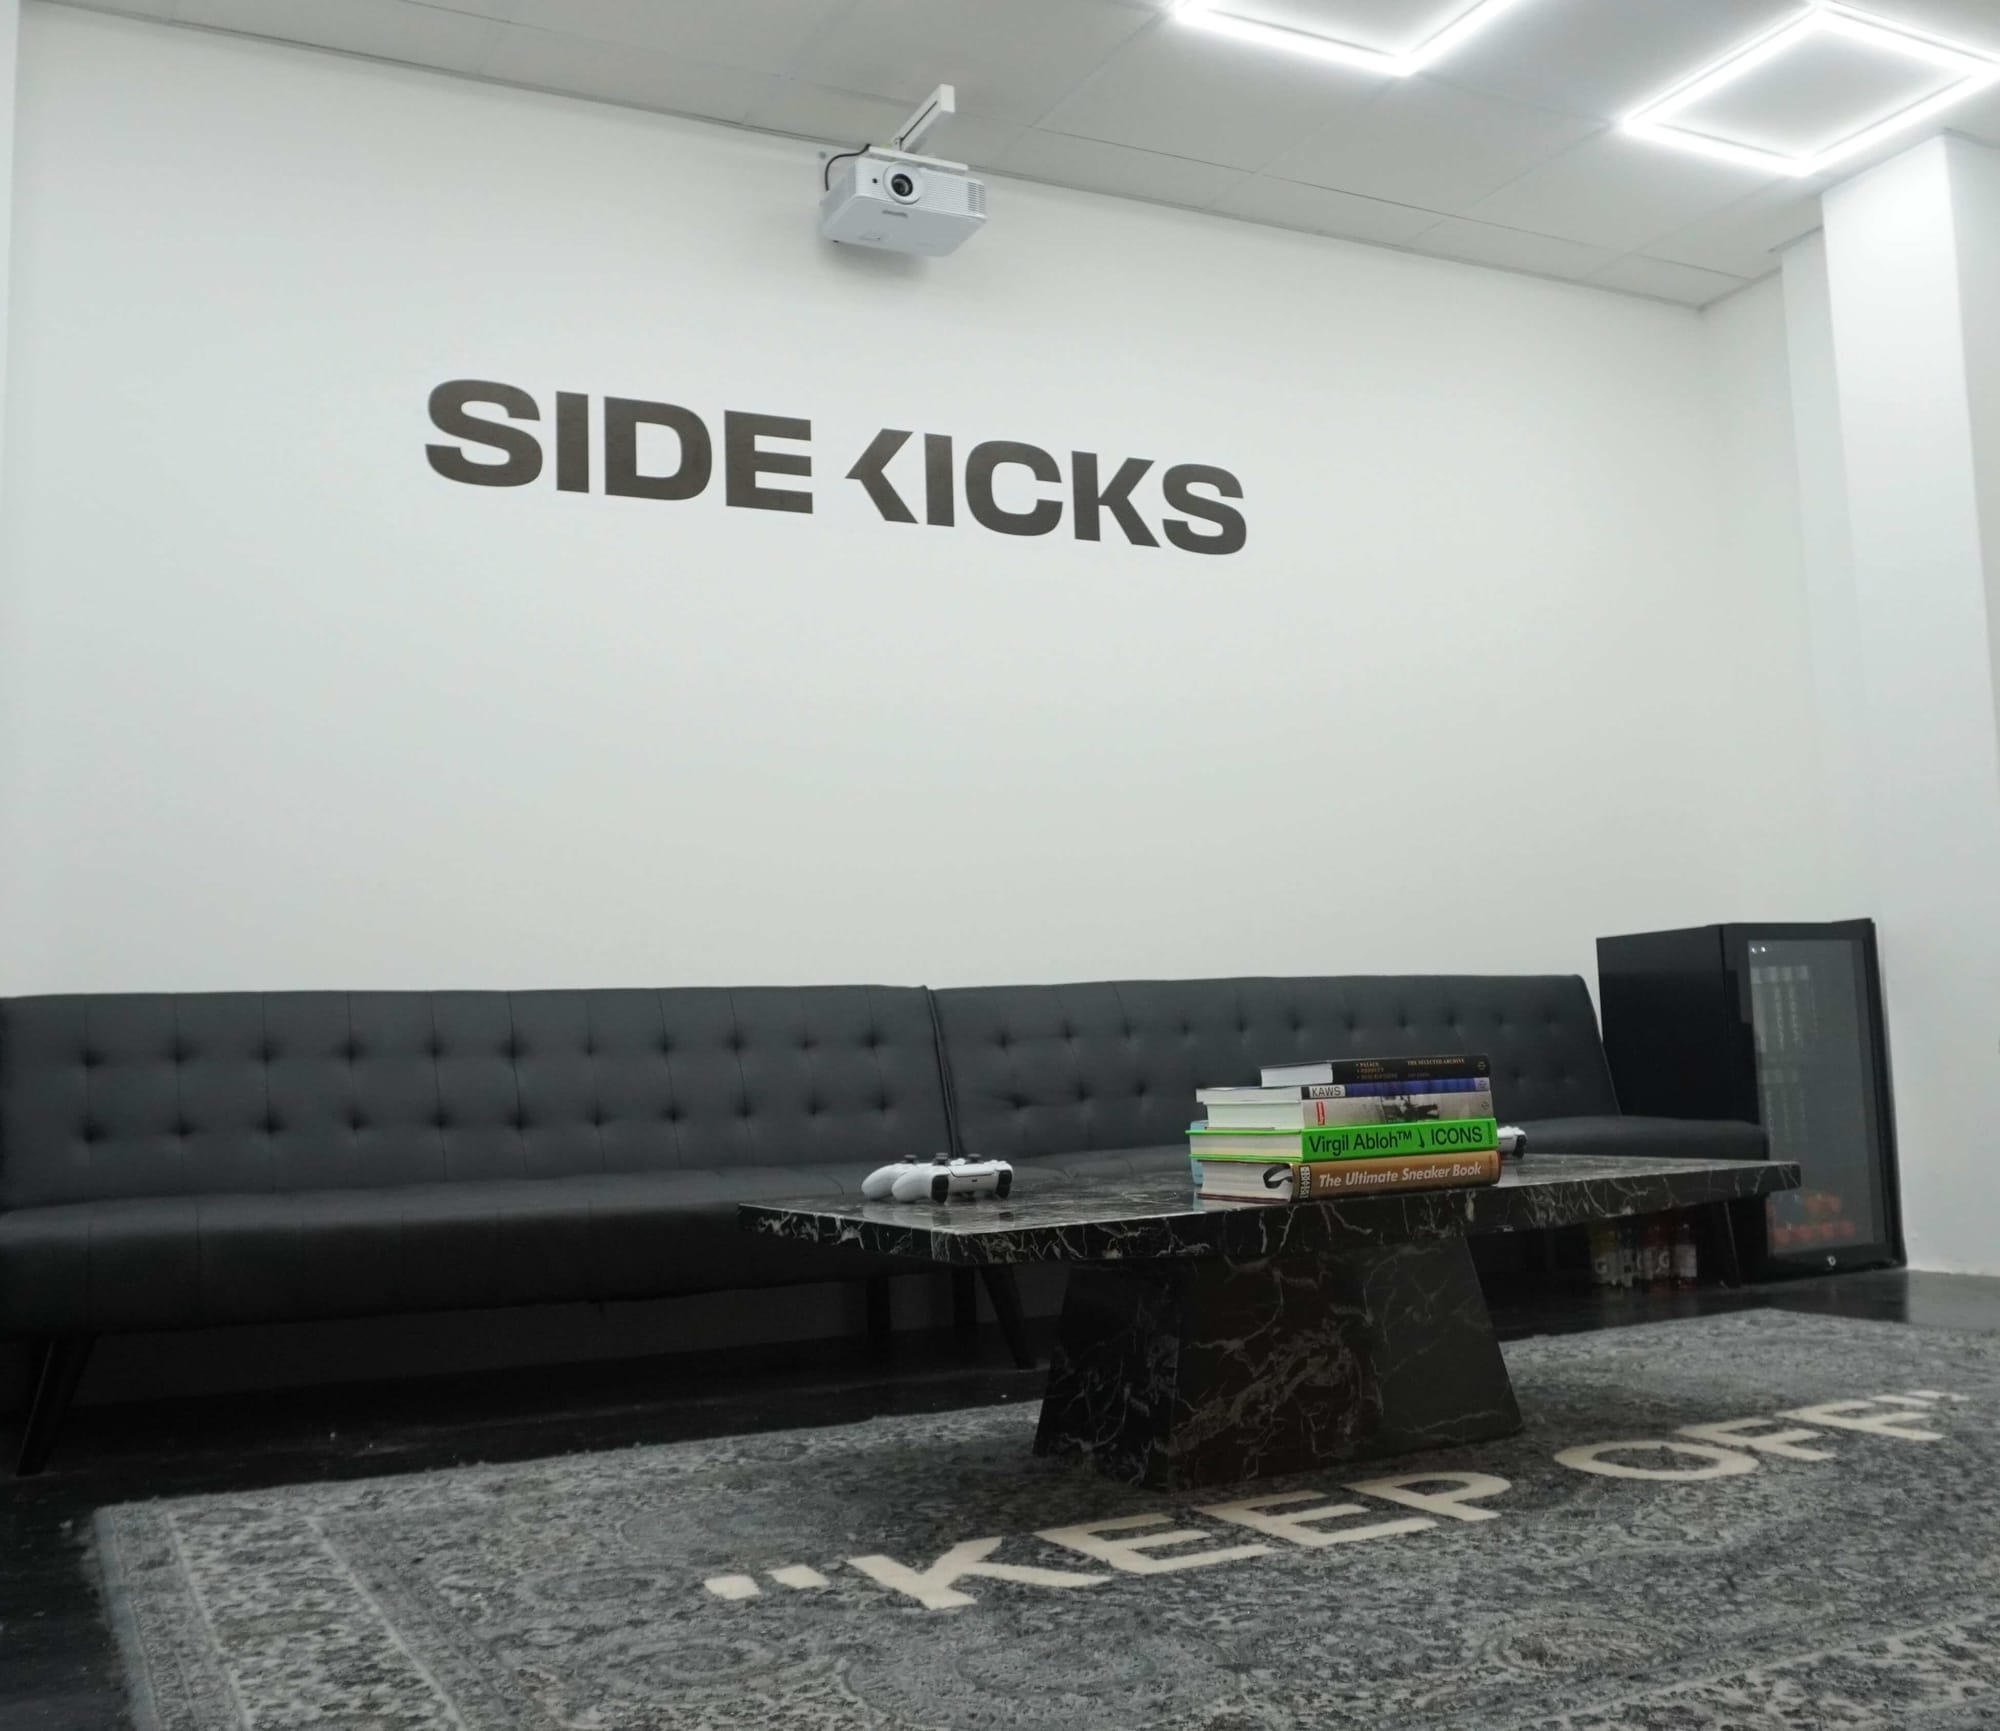 An image of the Side Kicks VIP Room. The logo is printed on the wall behind a chic black couch. There is a coffee table with several books, a video game controller, and a fully stocked mini fridge.